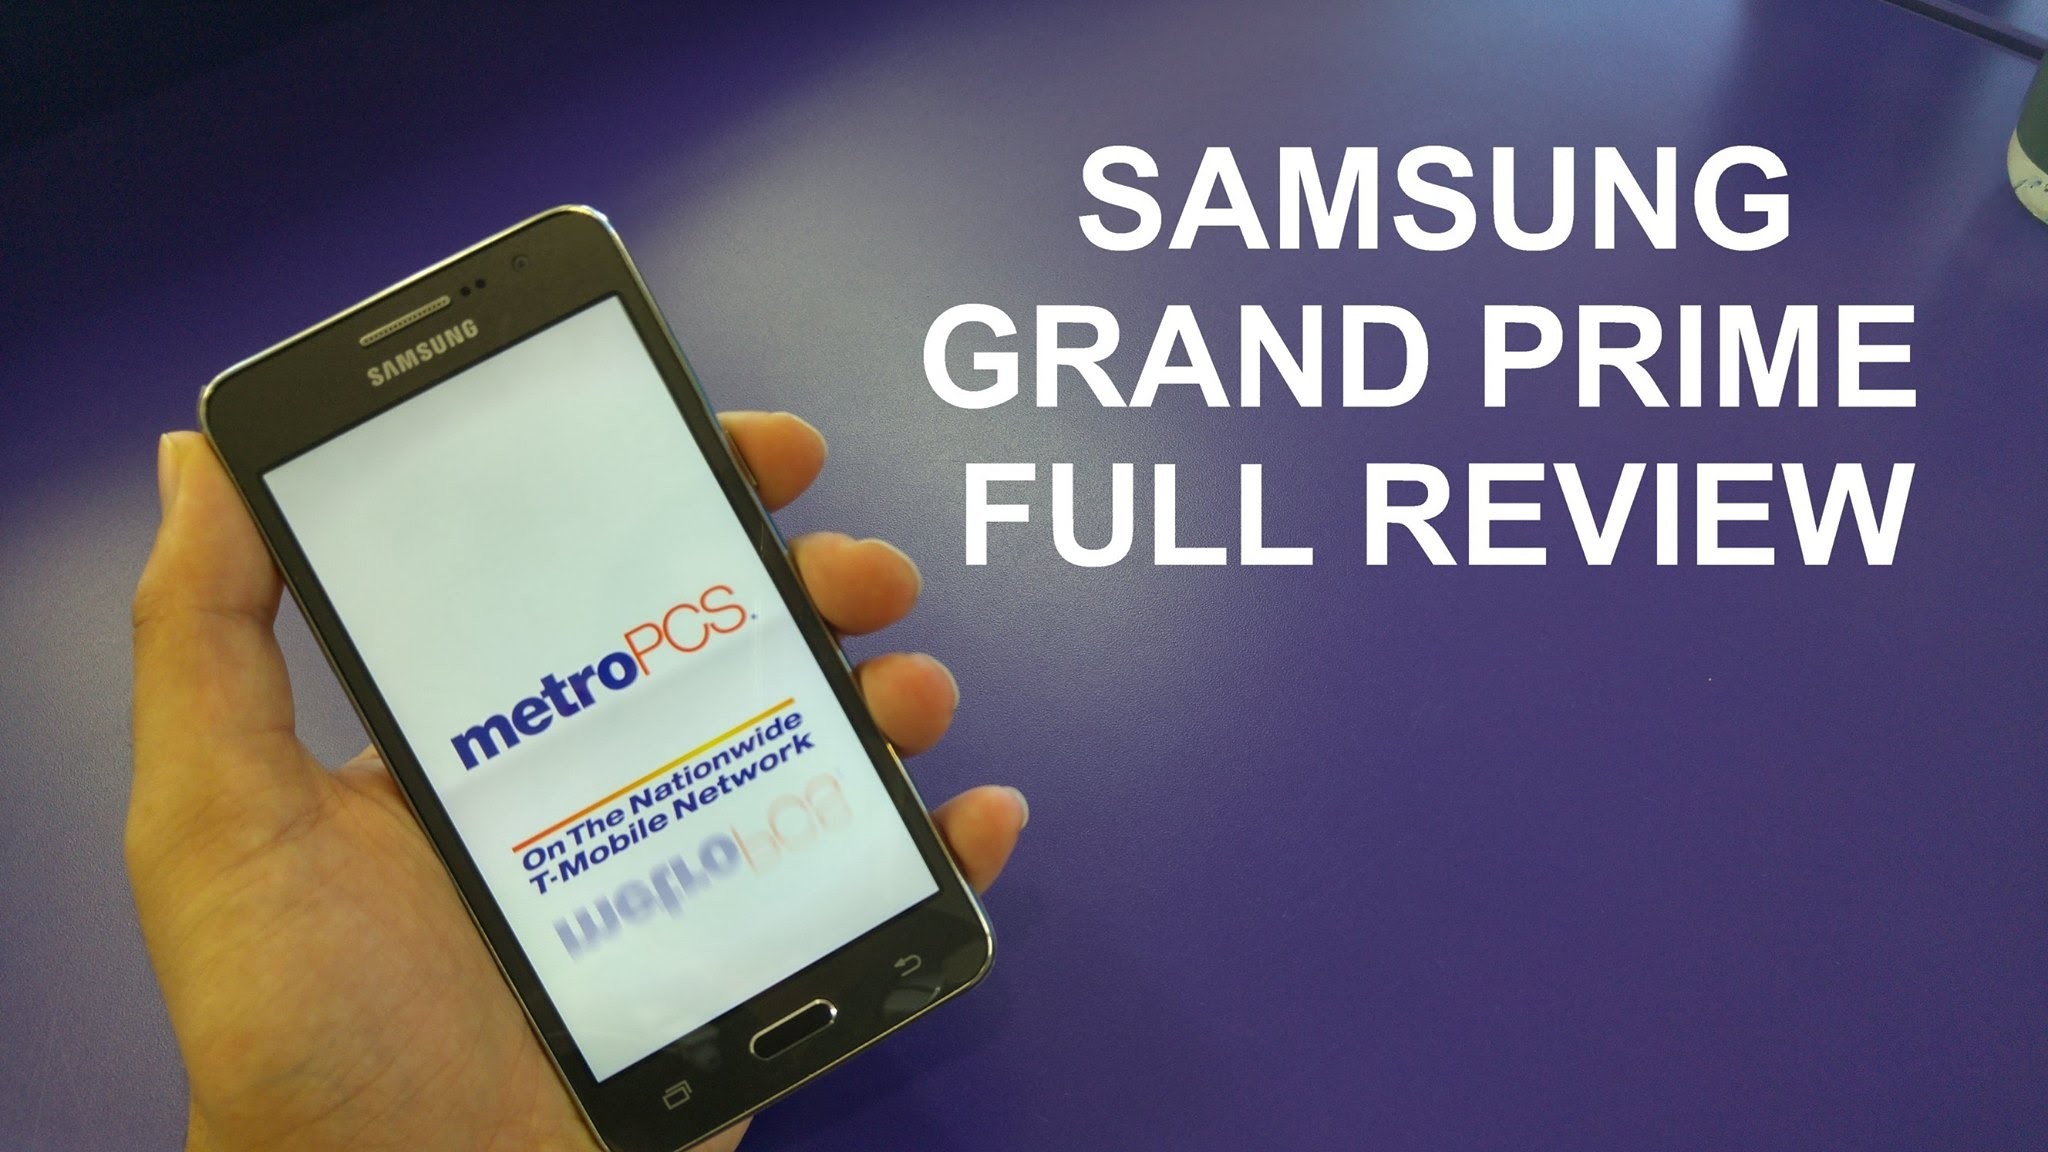 Samsung Galaxy Grand Prime Full Review For Metro PCsT mobile – YouTube